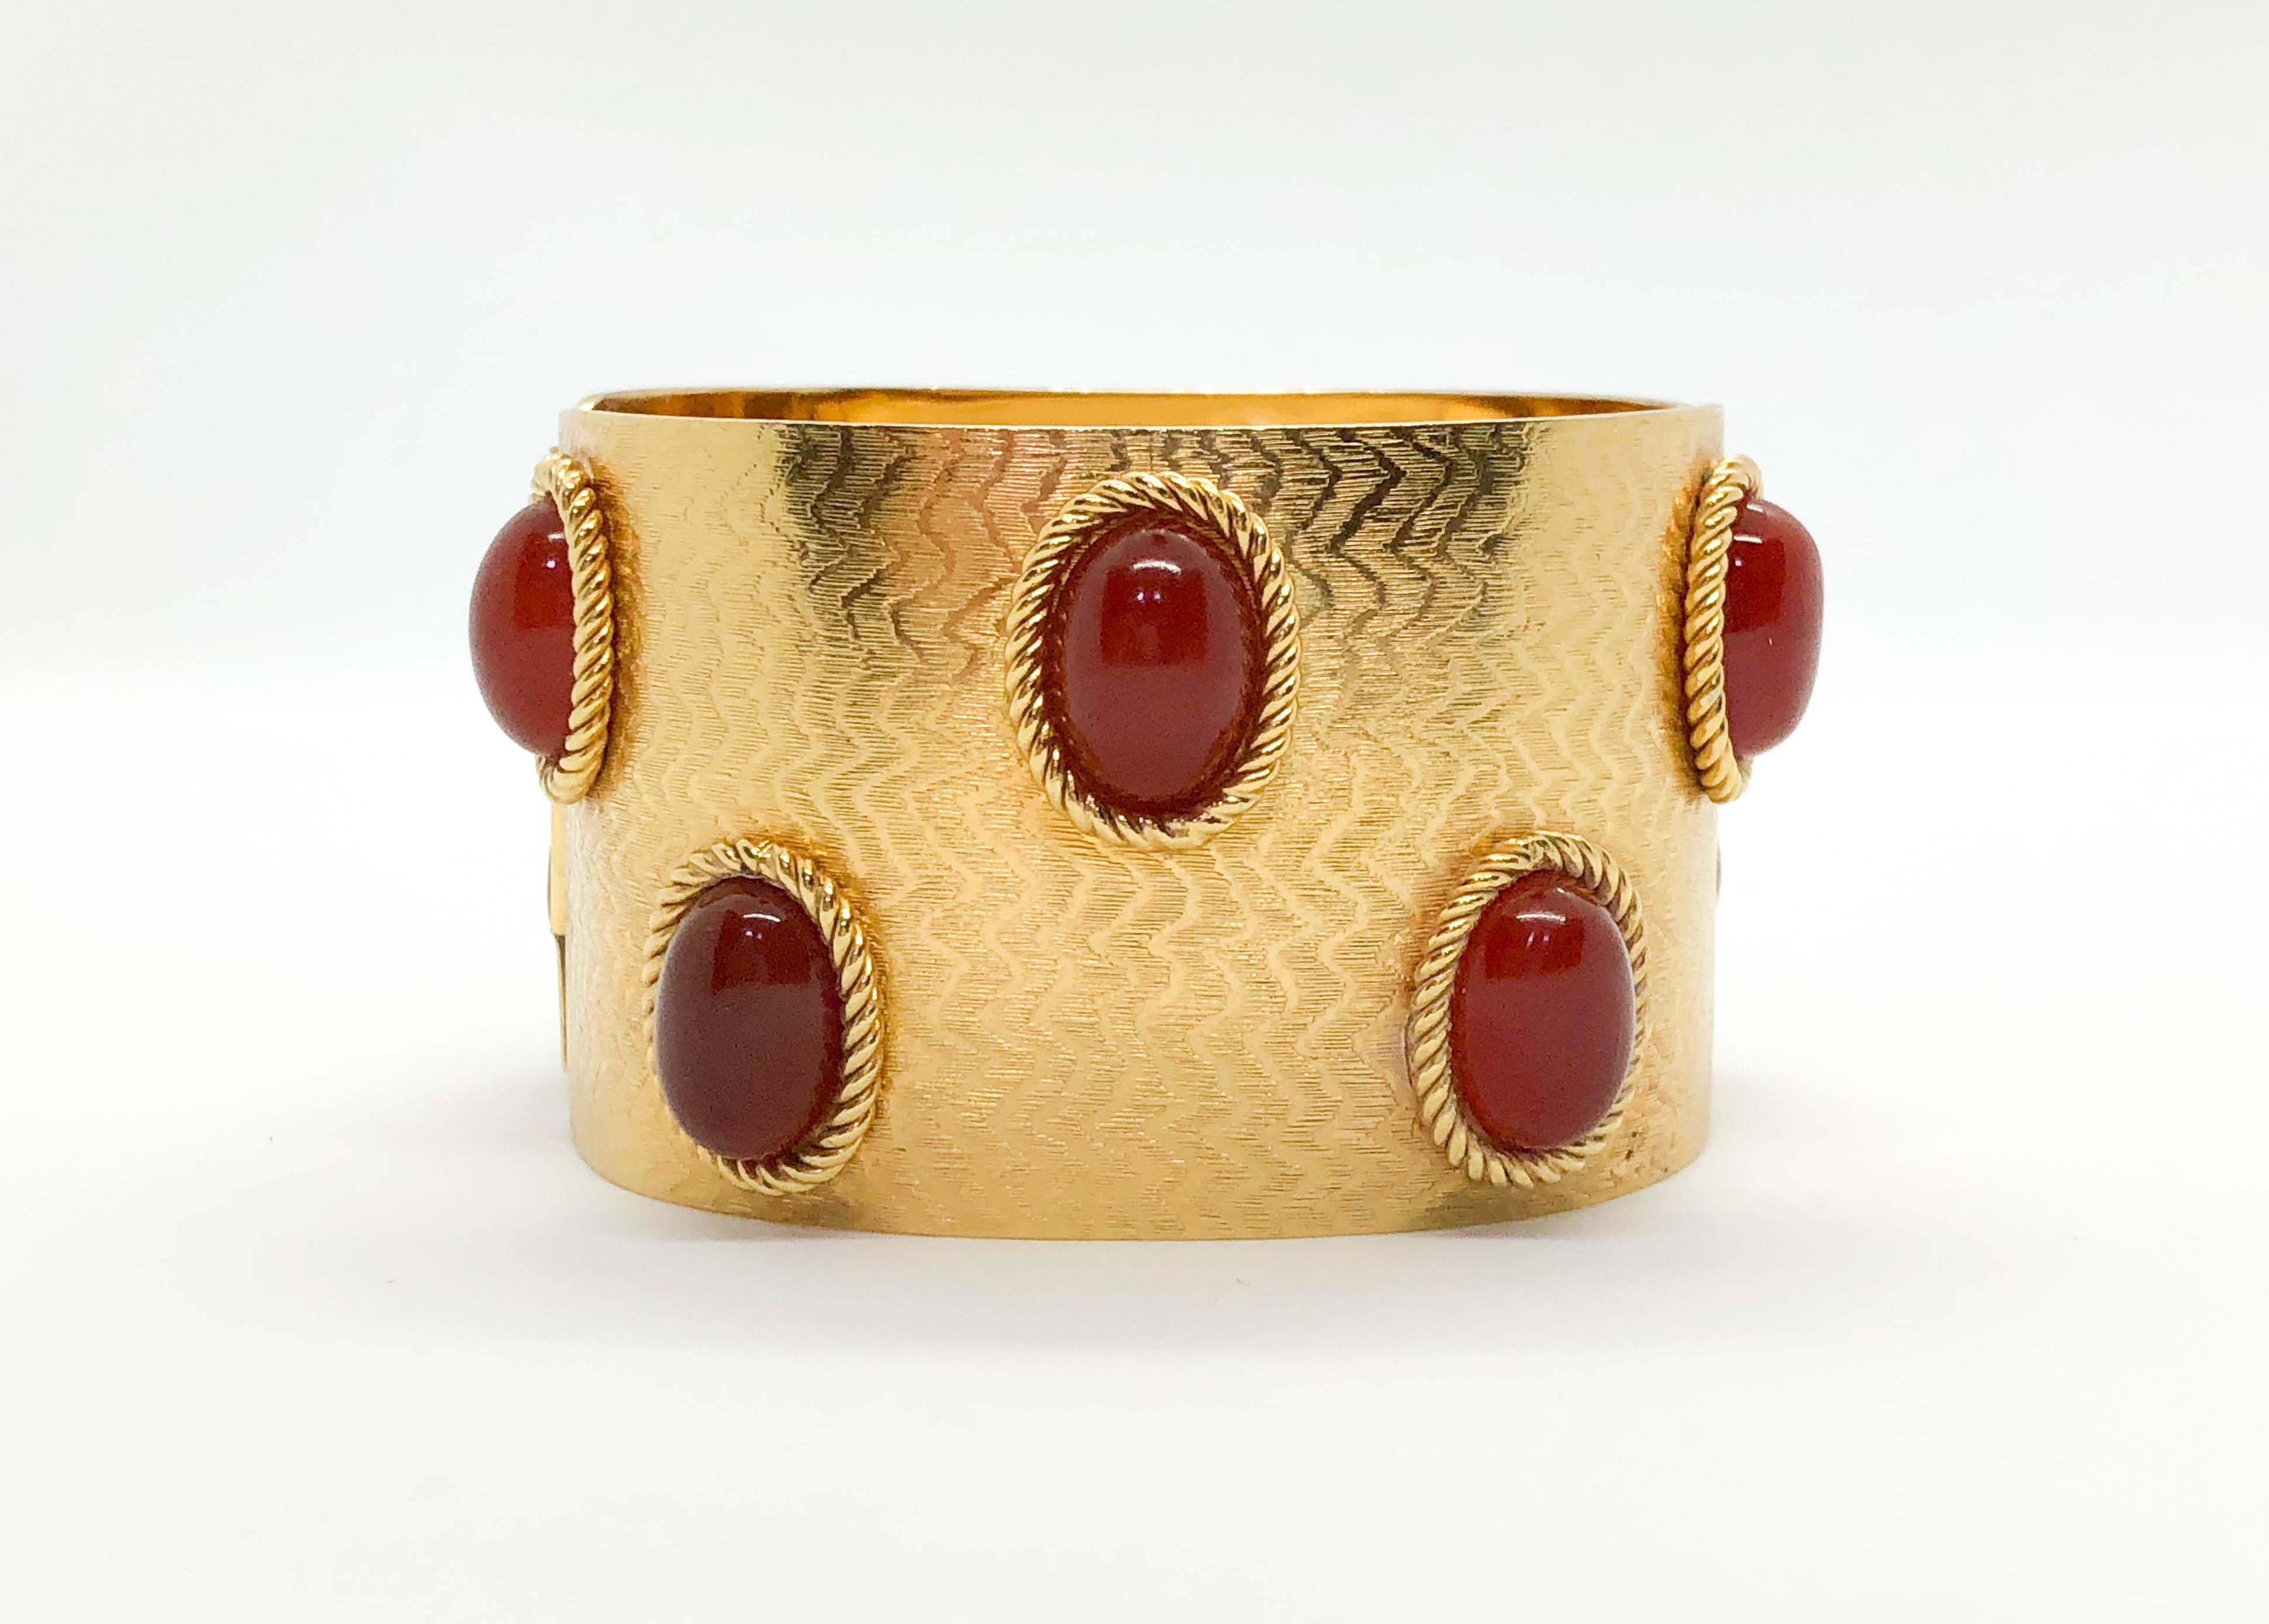 1968 Dior Gold-Plated Cuff Bracelet Embellished with Faux Amber Beads For Sale 3